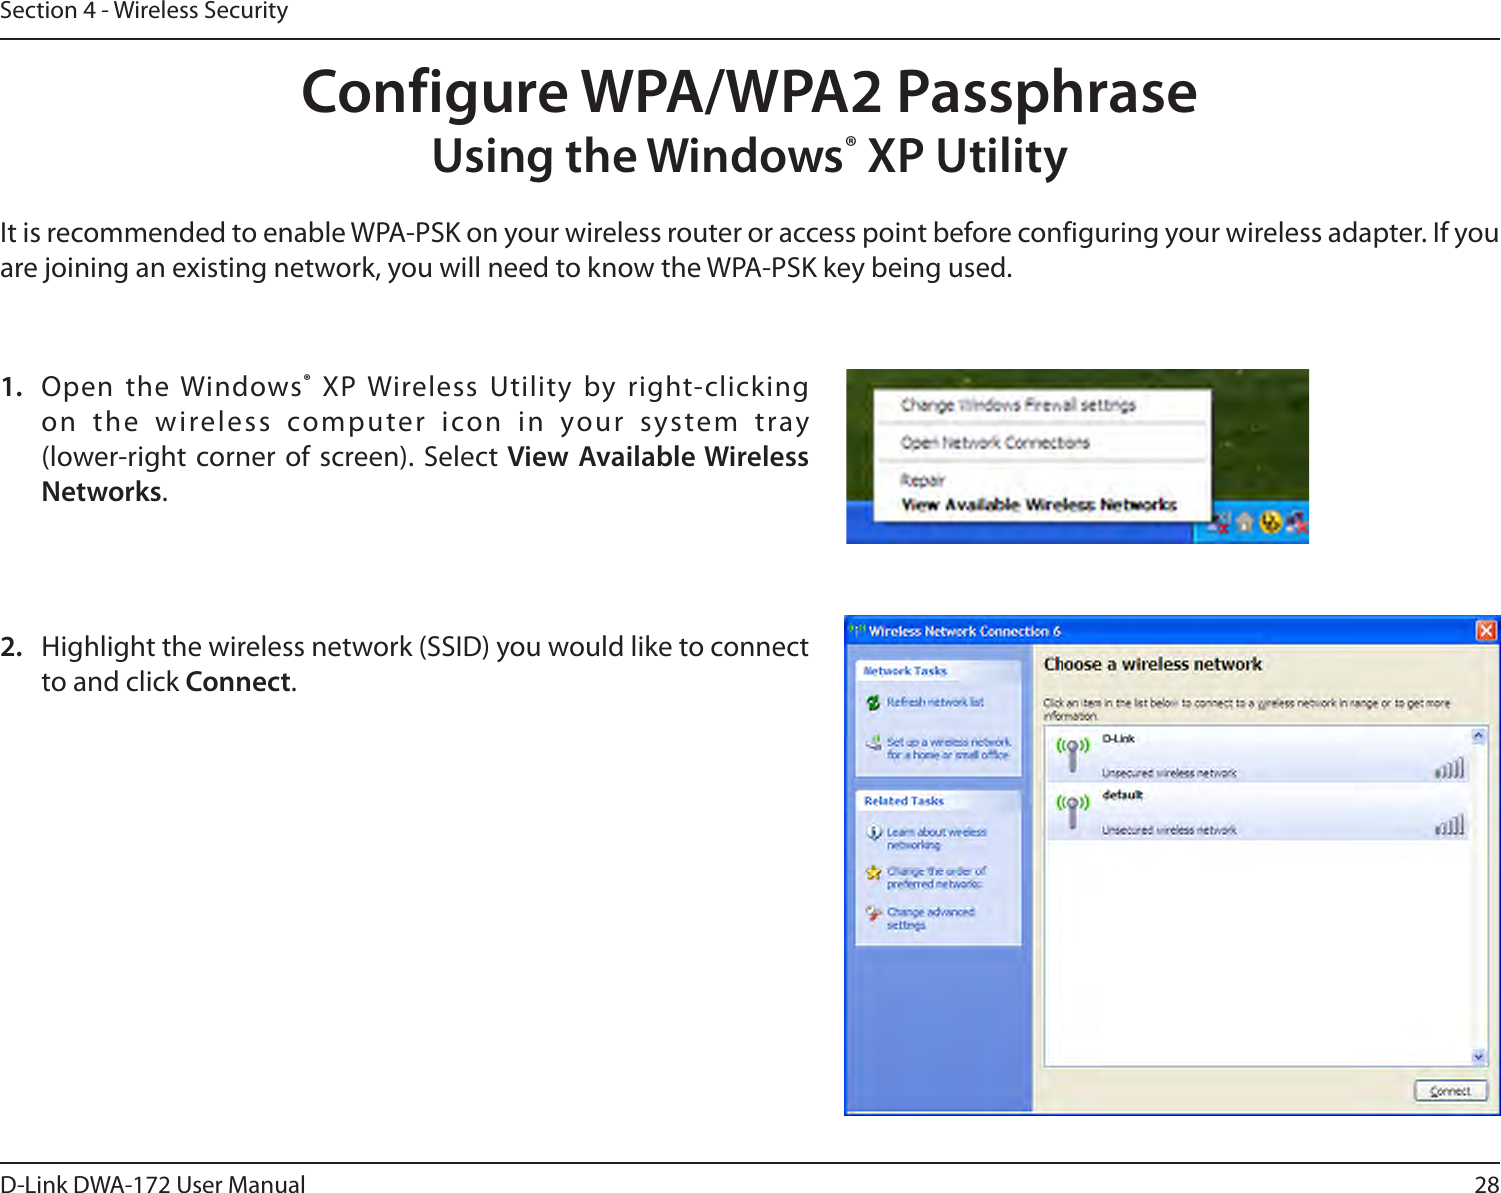 28D-Link DWA-172 User ManualSection 4 - Wireless SecurityConfigure WPA/WPA2 PassphraseUsing the Windows® XP UtilityIt is recommended to enable WPA-PSK on your wireless router or access point before configuring your wireless adapter. If you are joining an existing network, you will need to know the WPA-PSK key being used.2.  Highlight the wireless network (SSID) you would like to connect to and click Connect.1.  Open the Windows® XP Wireless Utility by right-clicking on the wireless computer icon in your system tray  (lower-right corner of screen). Select View Available Wireless Networks. 